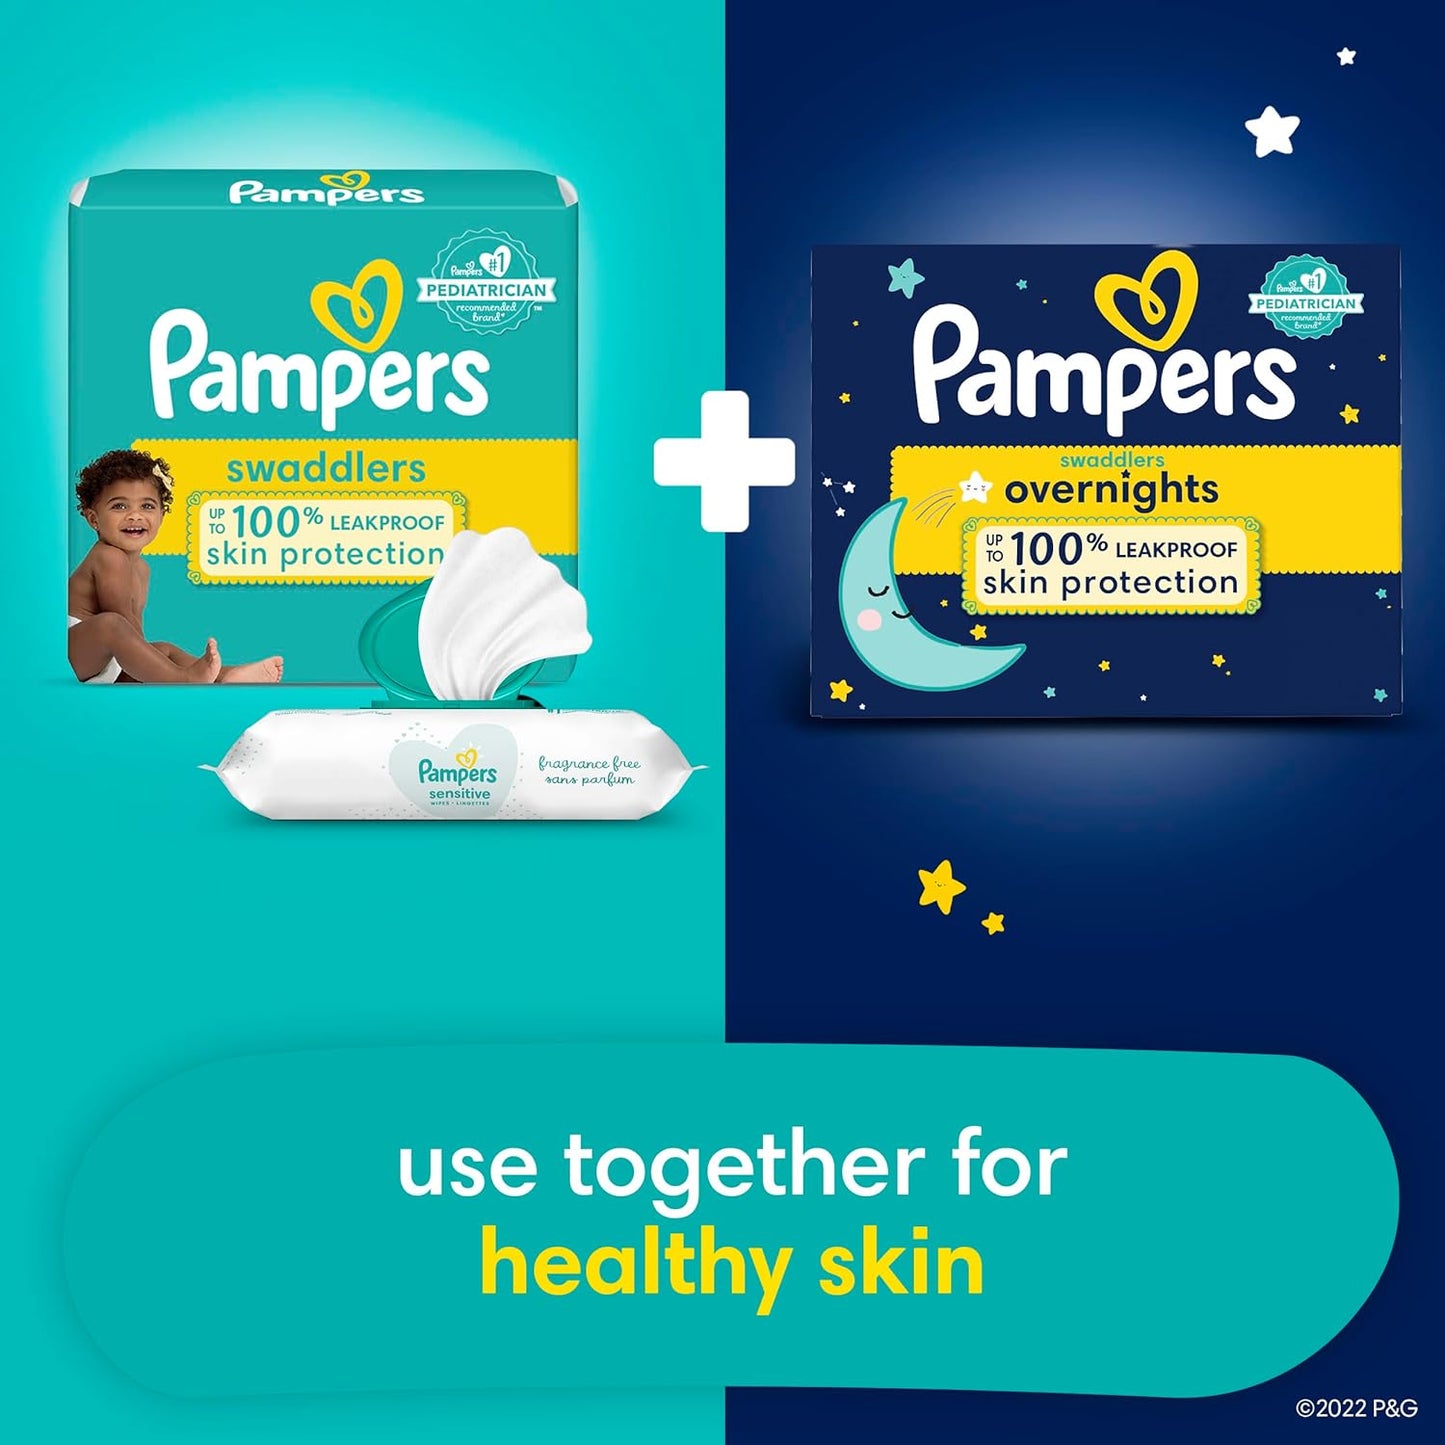 Pampers Swaddlers Diapers - Size 1, 164 Count (Pack of 1), Ultra Soft Disposable Baby Diapers